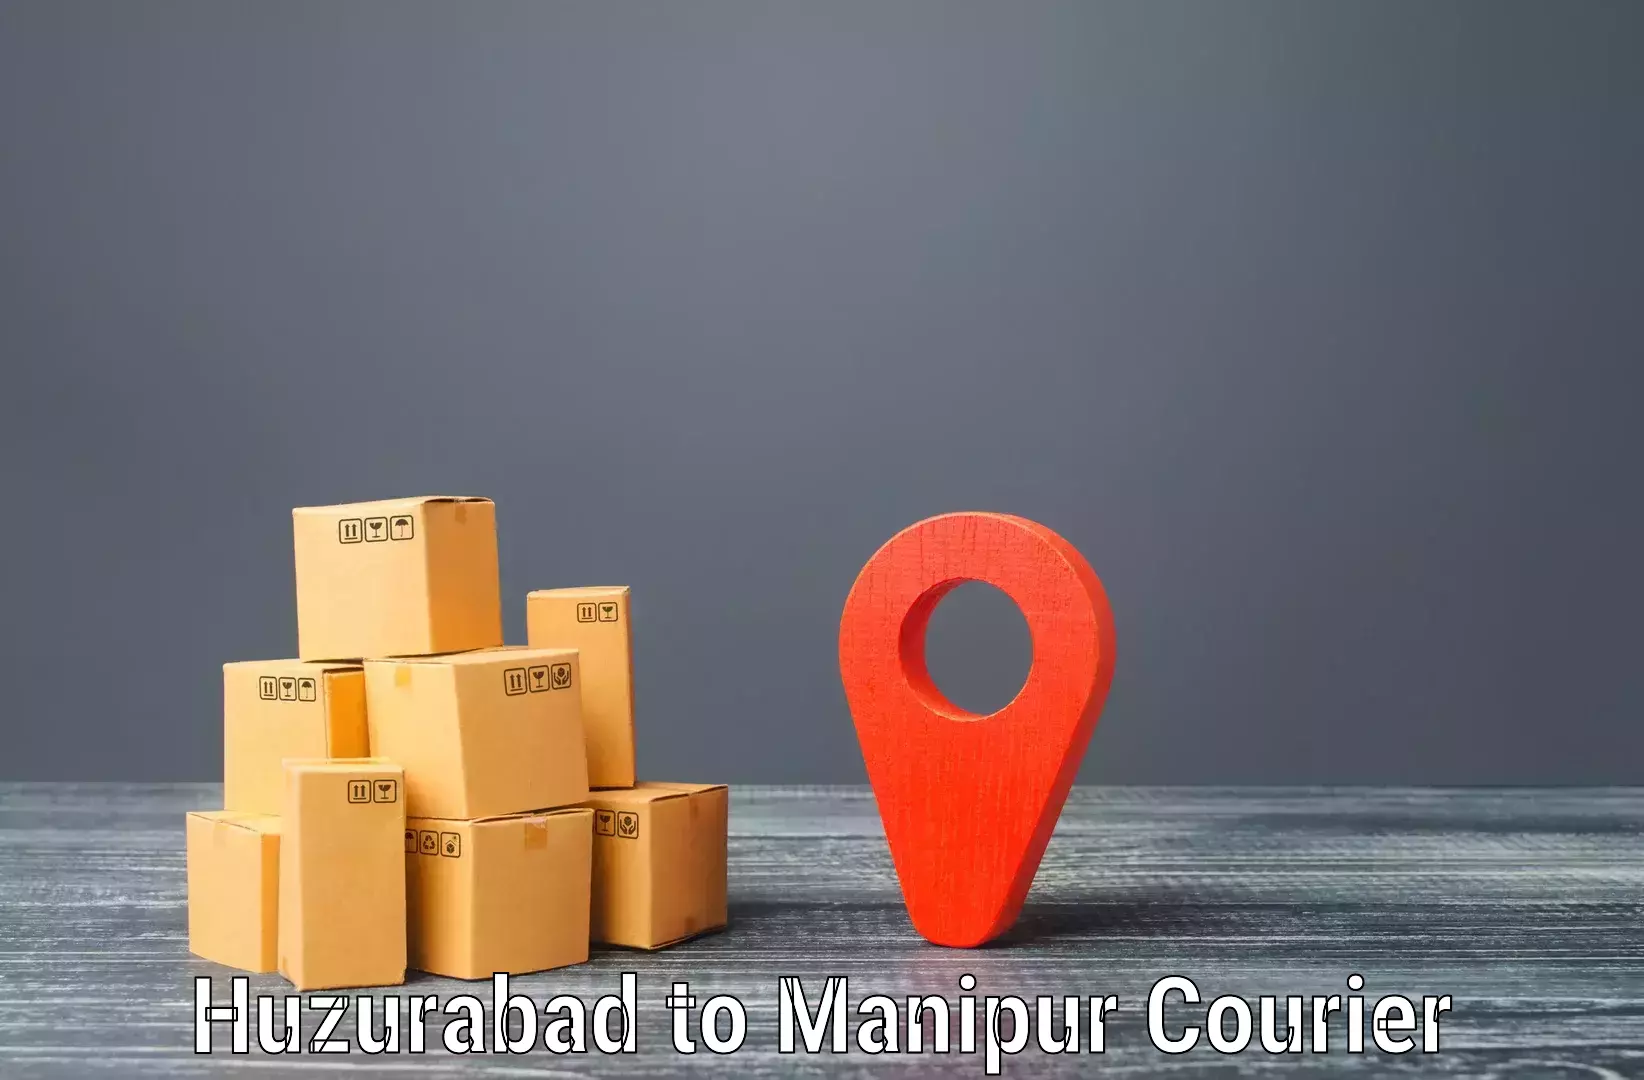 Subscription-based courier Huzurabad to Imphal